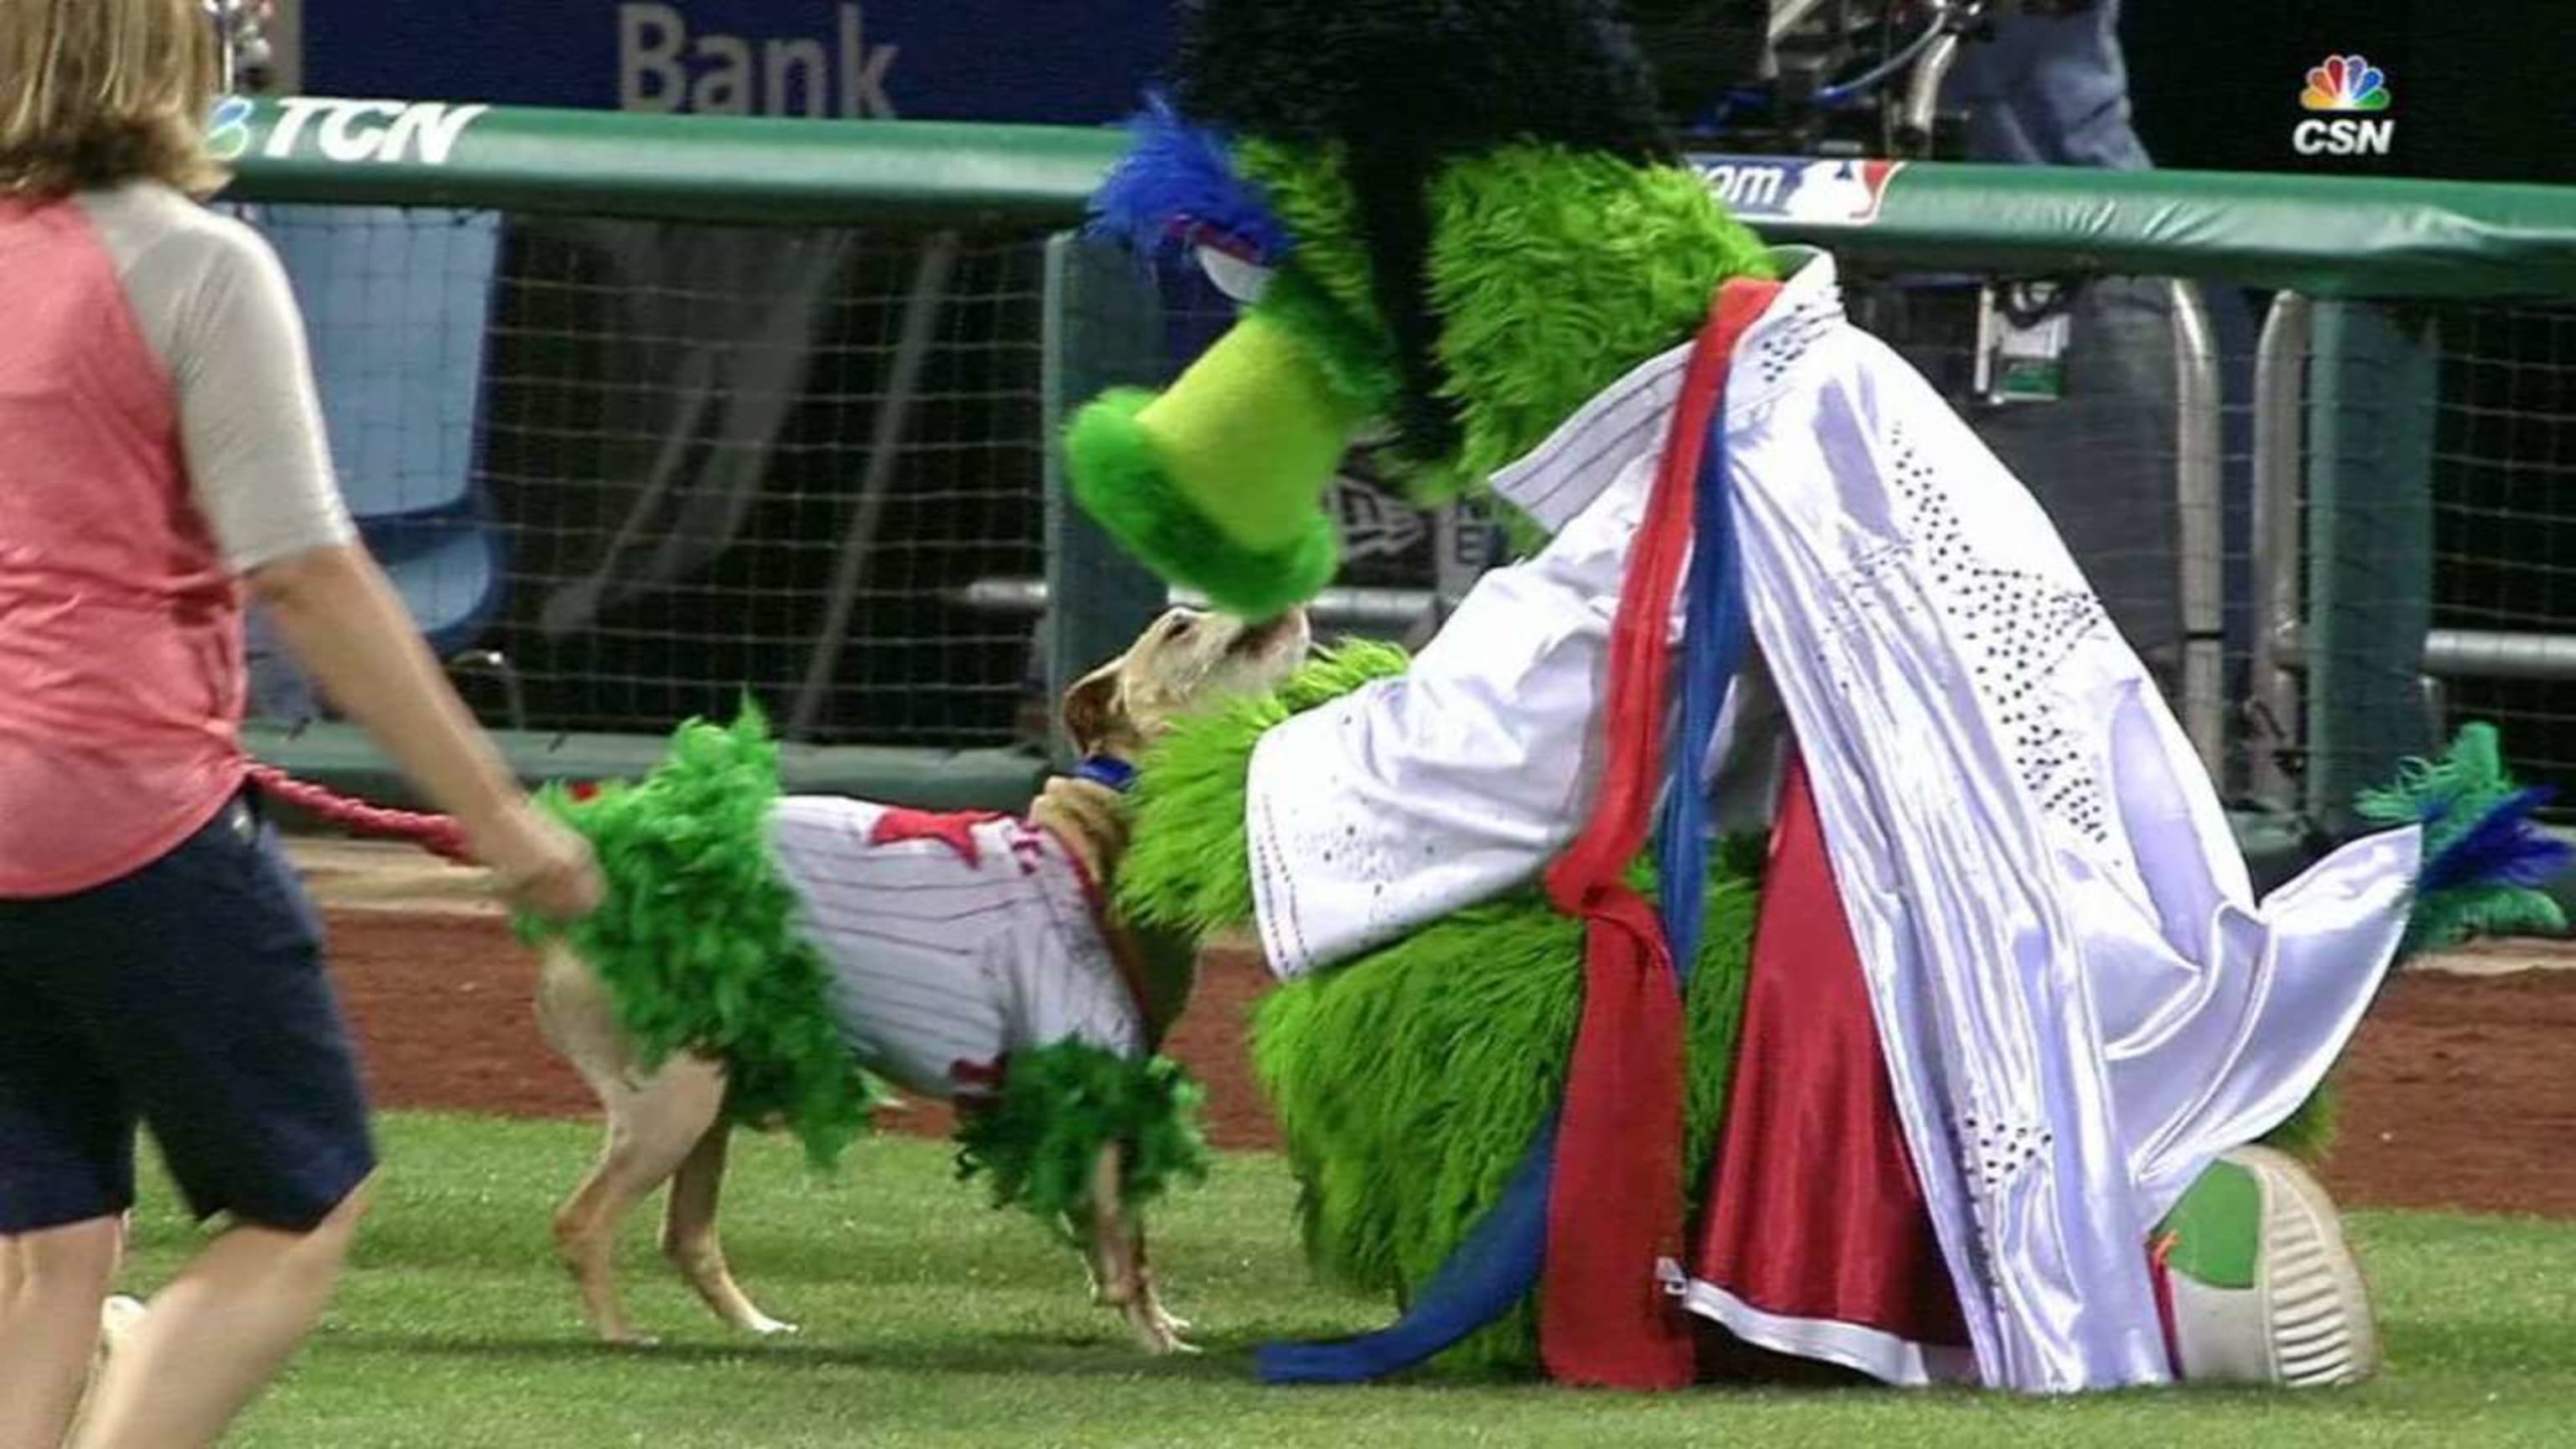 Adorable dog dressed as the Phillie Phanatic makes Phillie